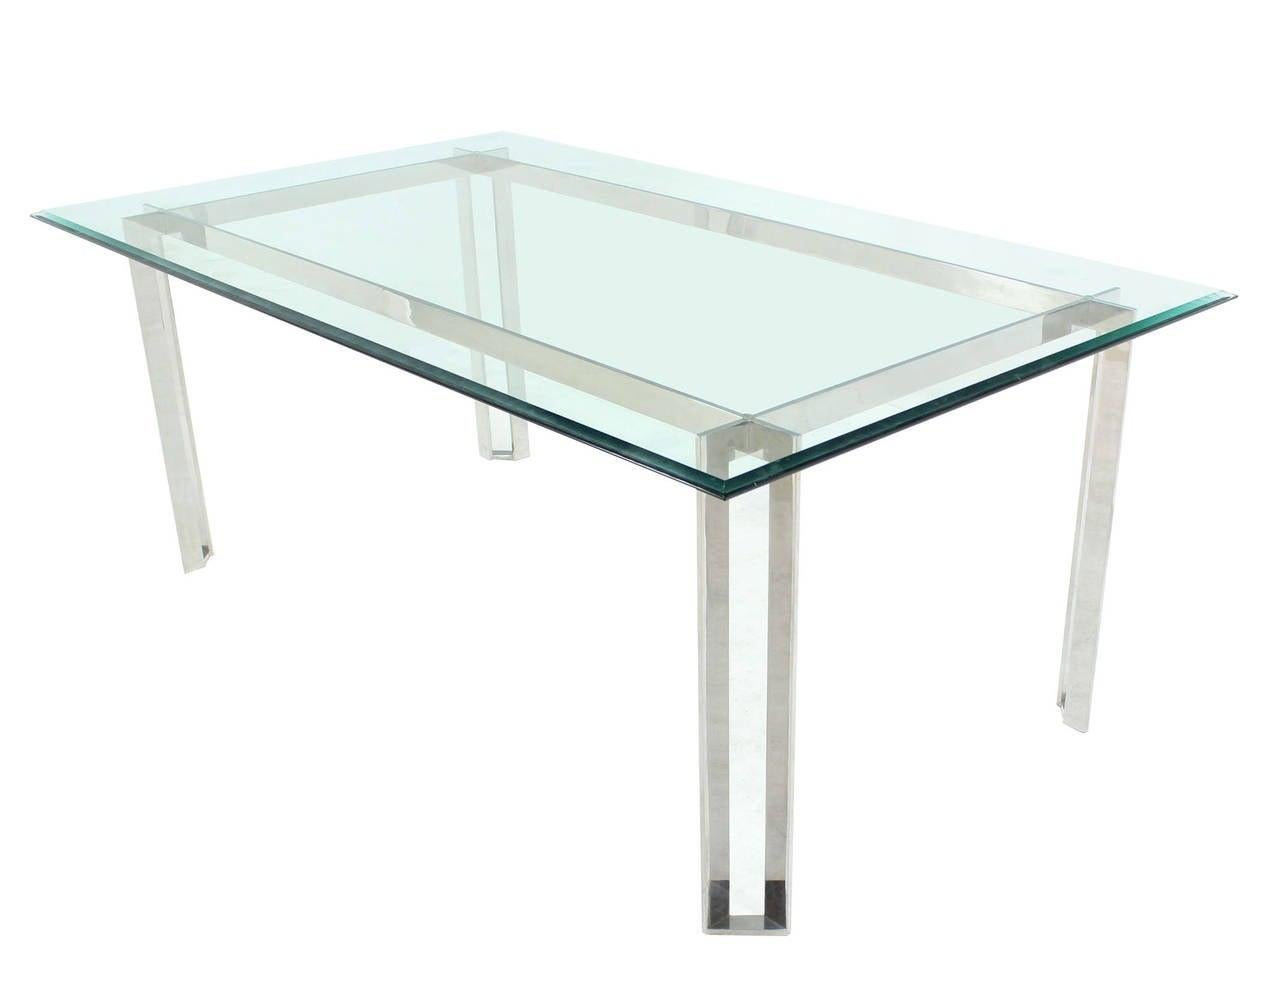 Polished Stainless Steel Base  Thick Glass Top Dining Room Table Mid Century  In Good Condition For Sale In Rockaway, NJ